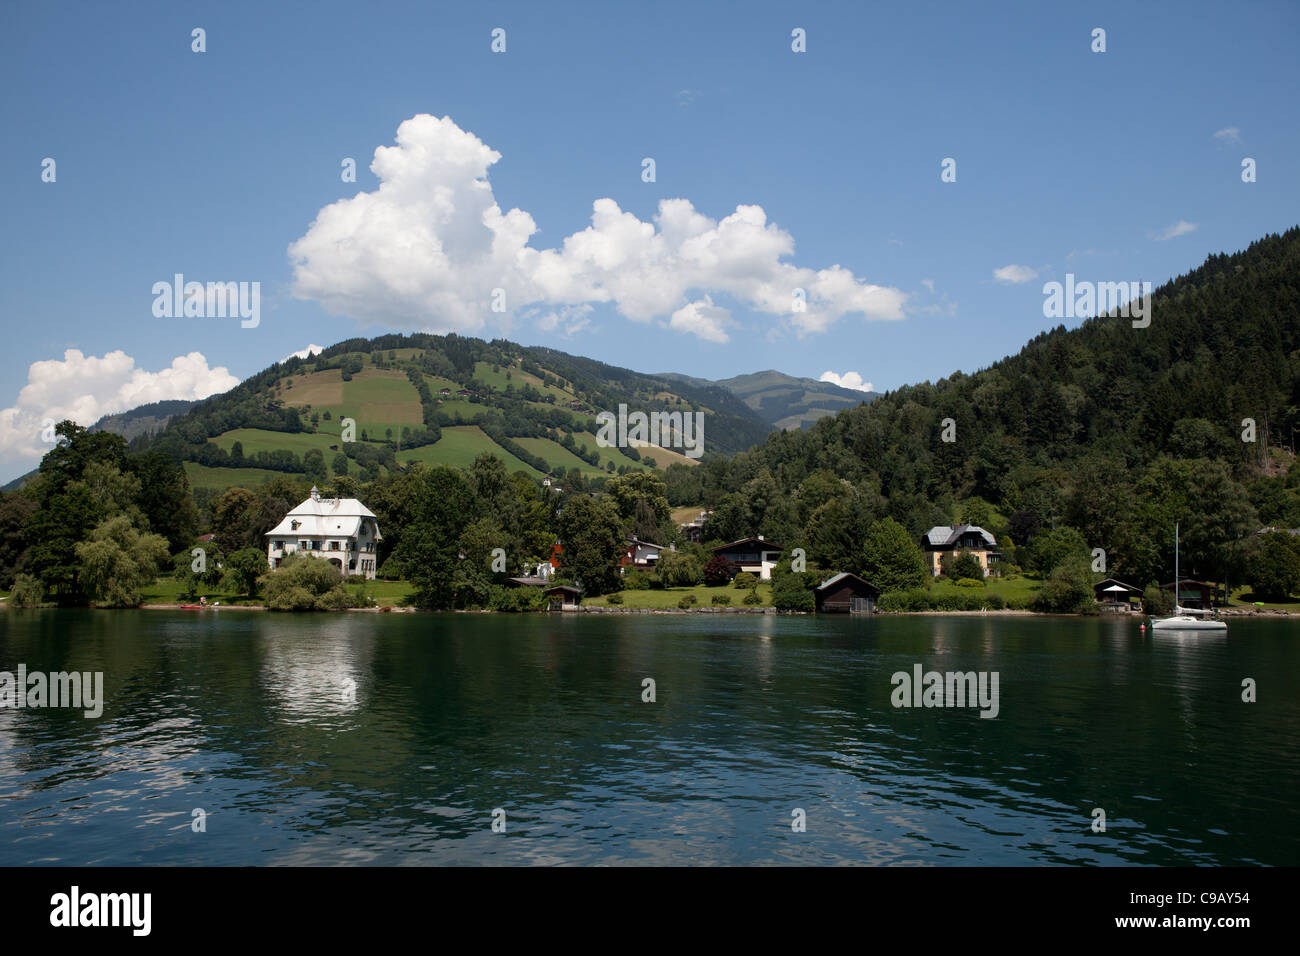 Image taken from the lake in Zell Am See. A beautiful landscape in the Alps in Austria Stock Photo